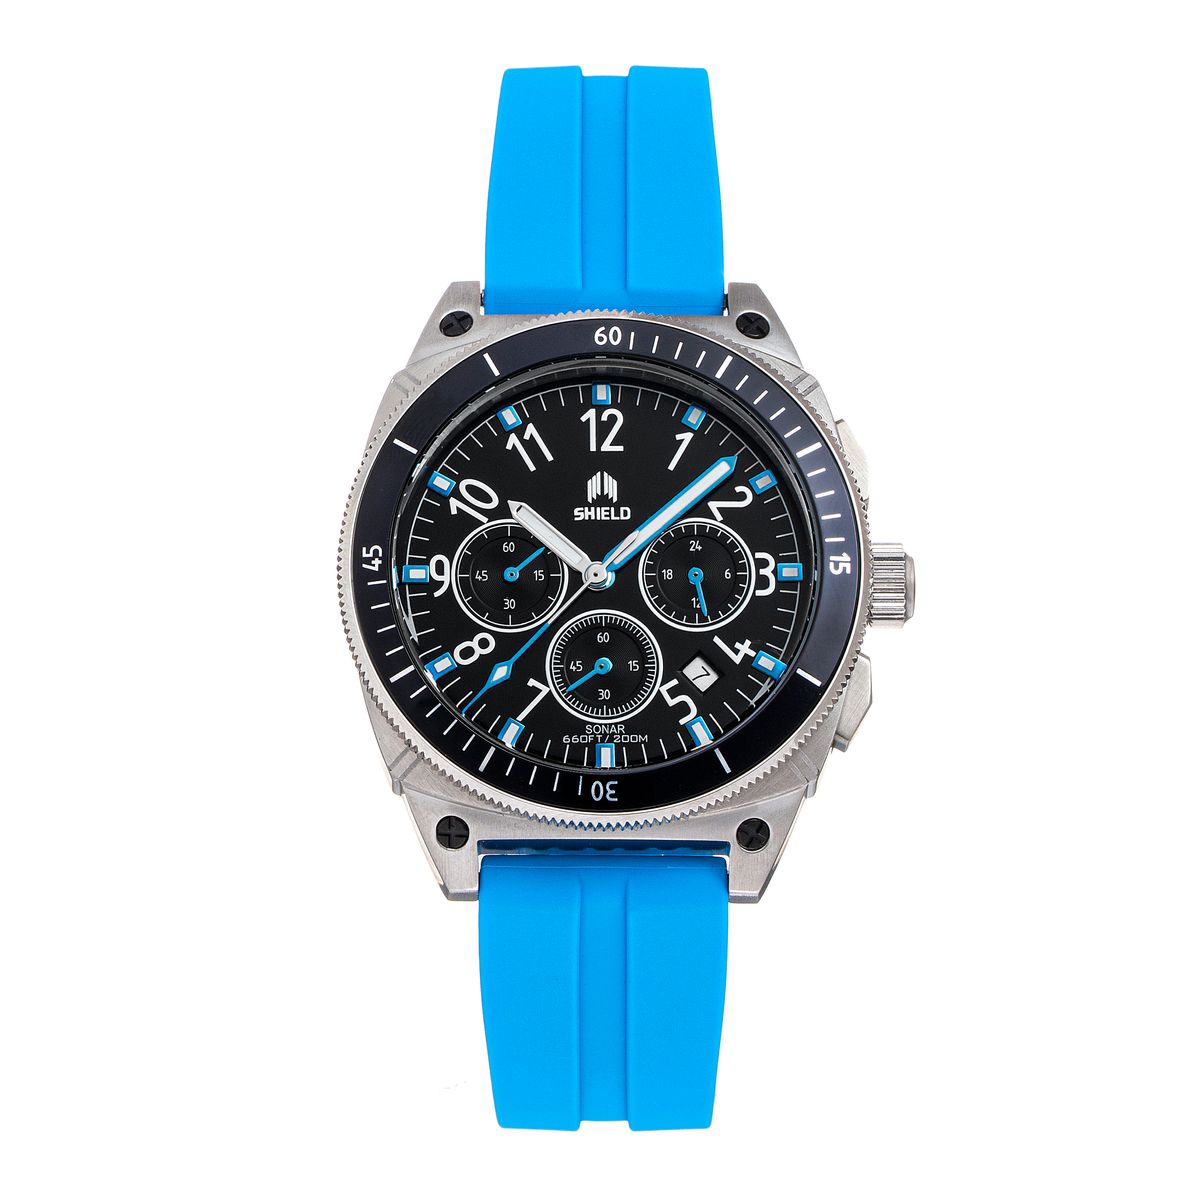 Photos - Wrist Watch Shield ™ Sonar Chronograph Strap Watches with Date - Light Blue SLDS 